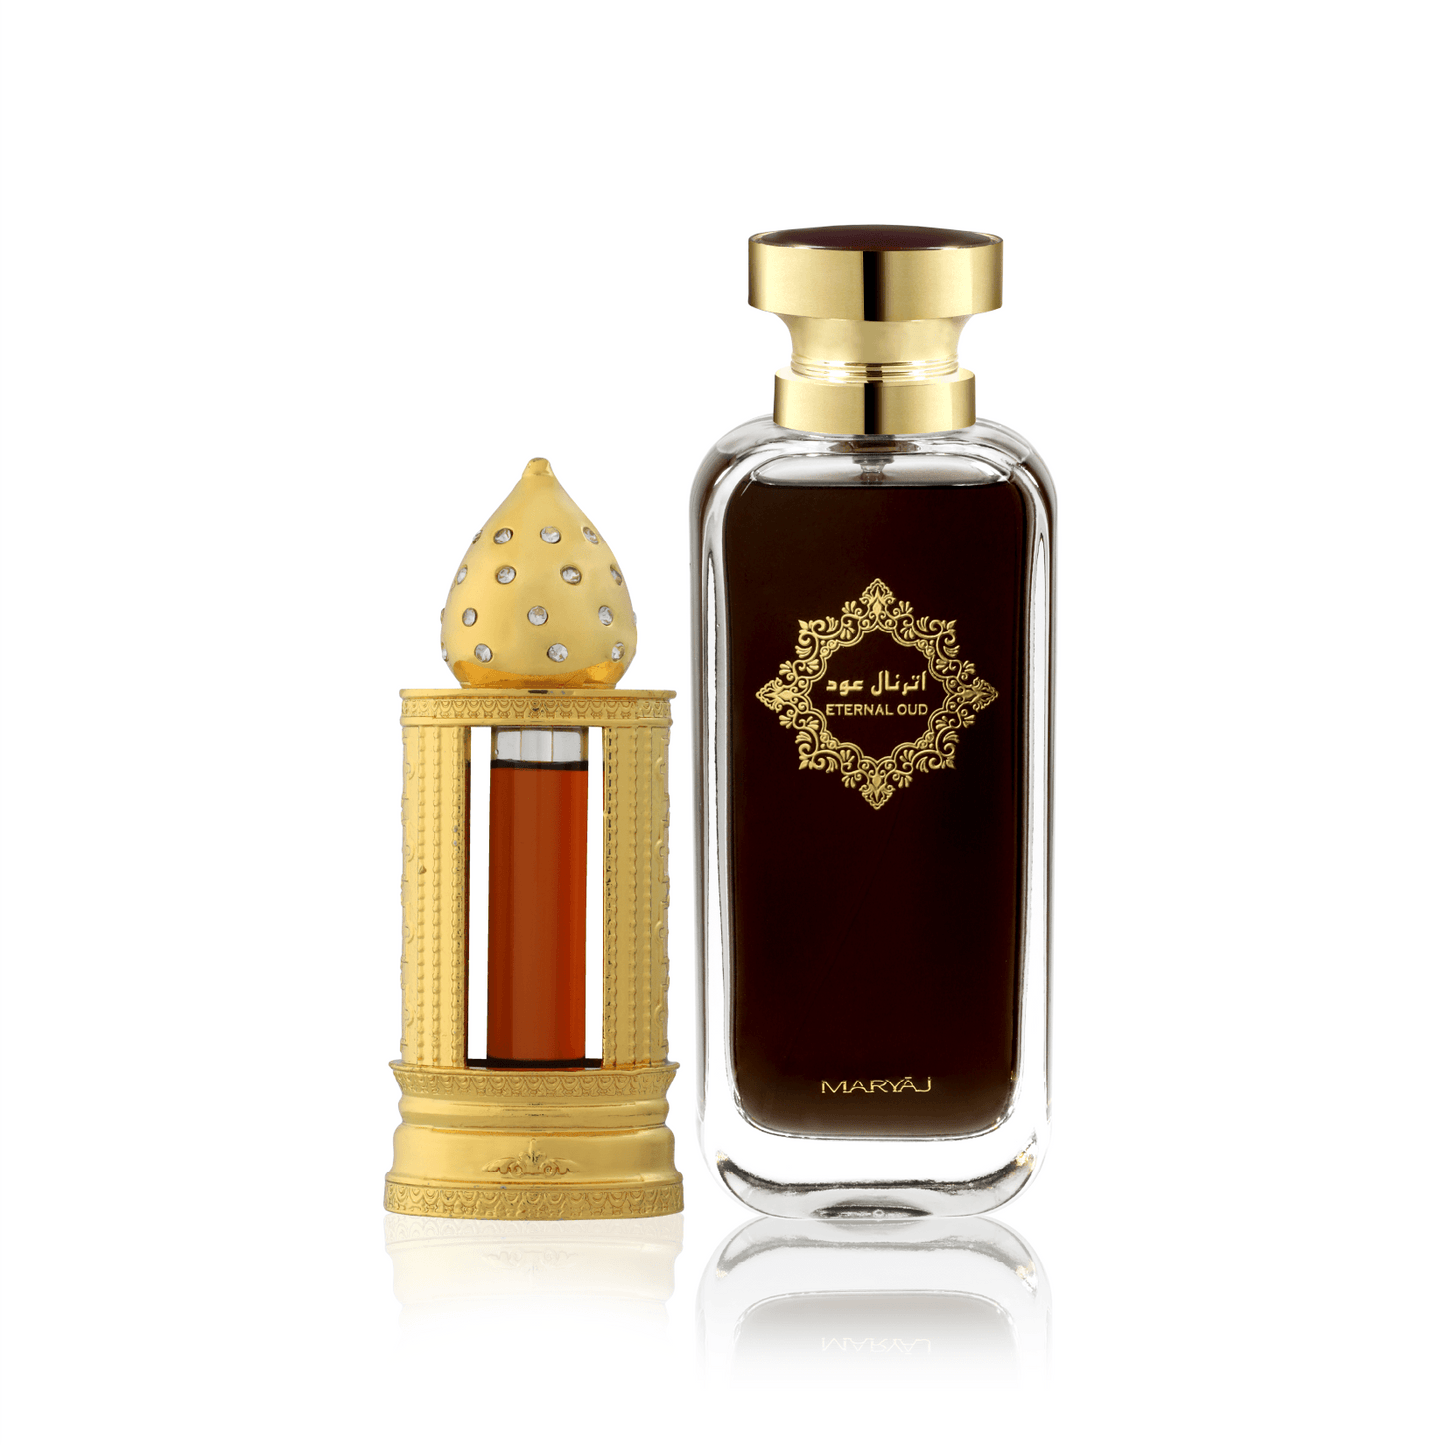 ETERNAL OUD EDT with DAHN AL OUD Combo for Unisex, Pack of 2